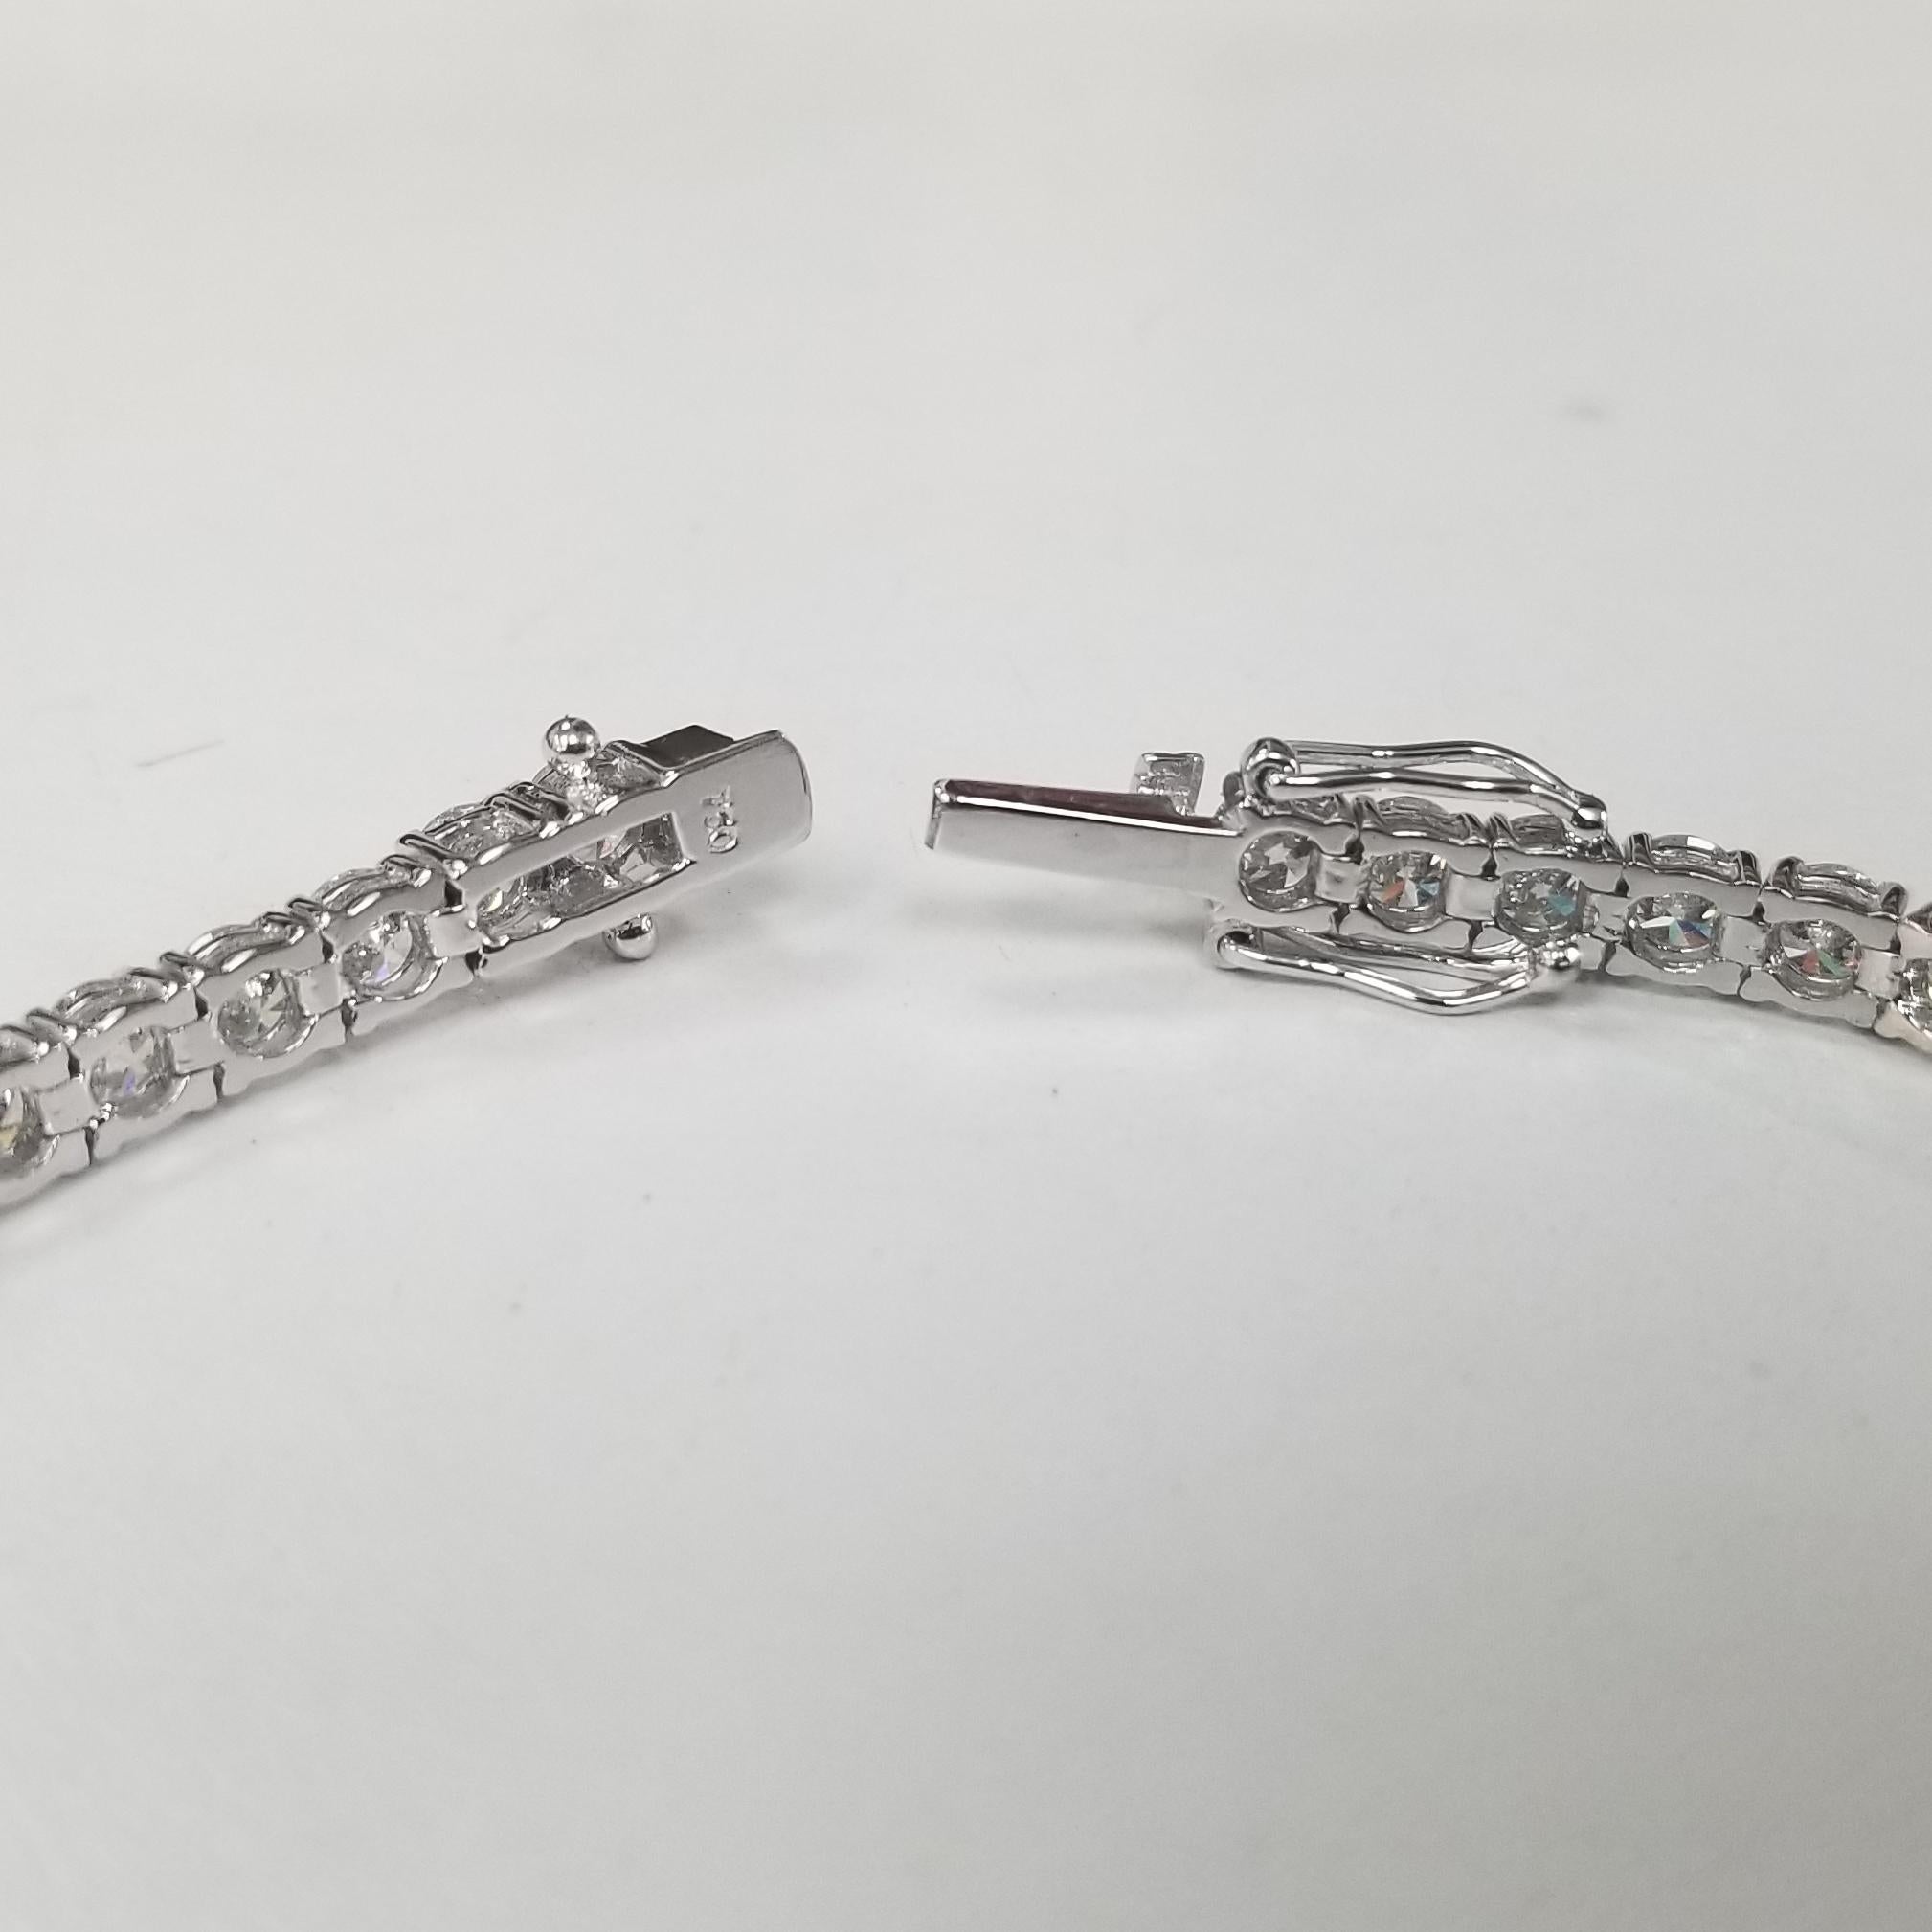 This is very beautiful 18k white gold custom made tennis bracelet with 45 round diamonds color F-G and clarity SI1 weighing 9.35cts. very fine quality diamonds, bracelet measures 7 inches with clasp and safety.
Specifications:
    main stone: ROUND